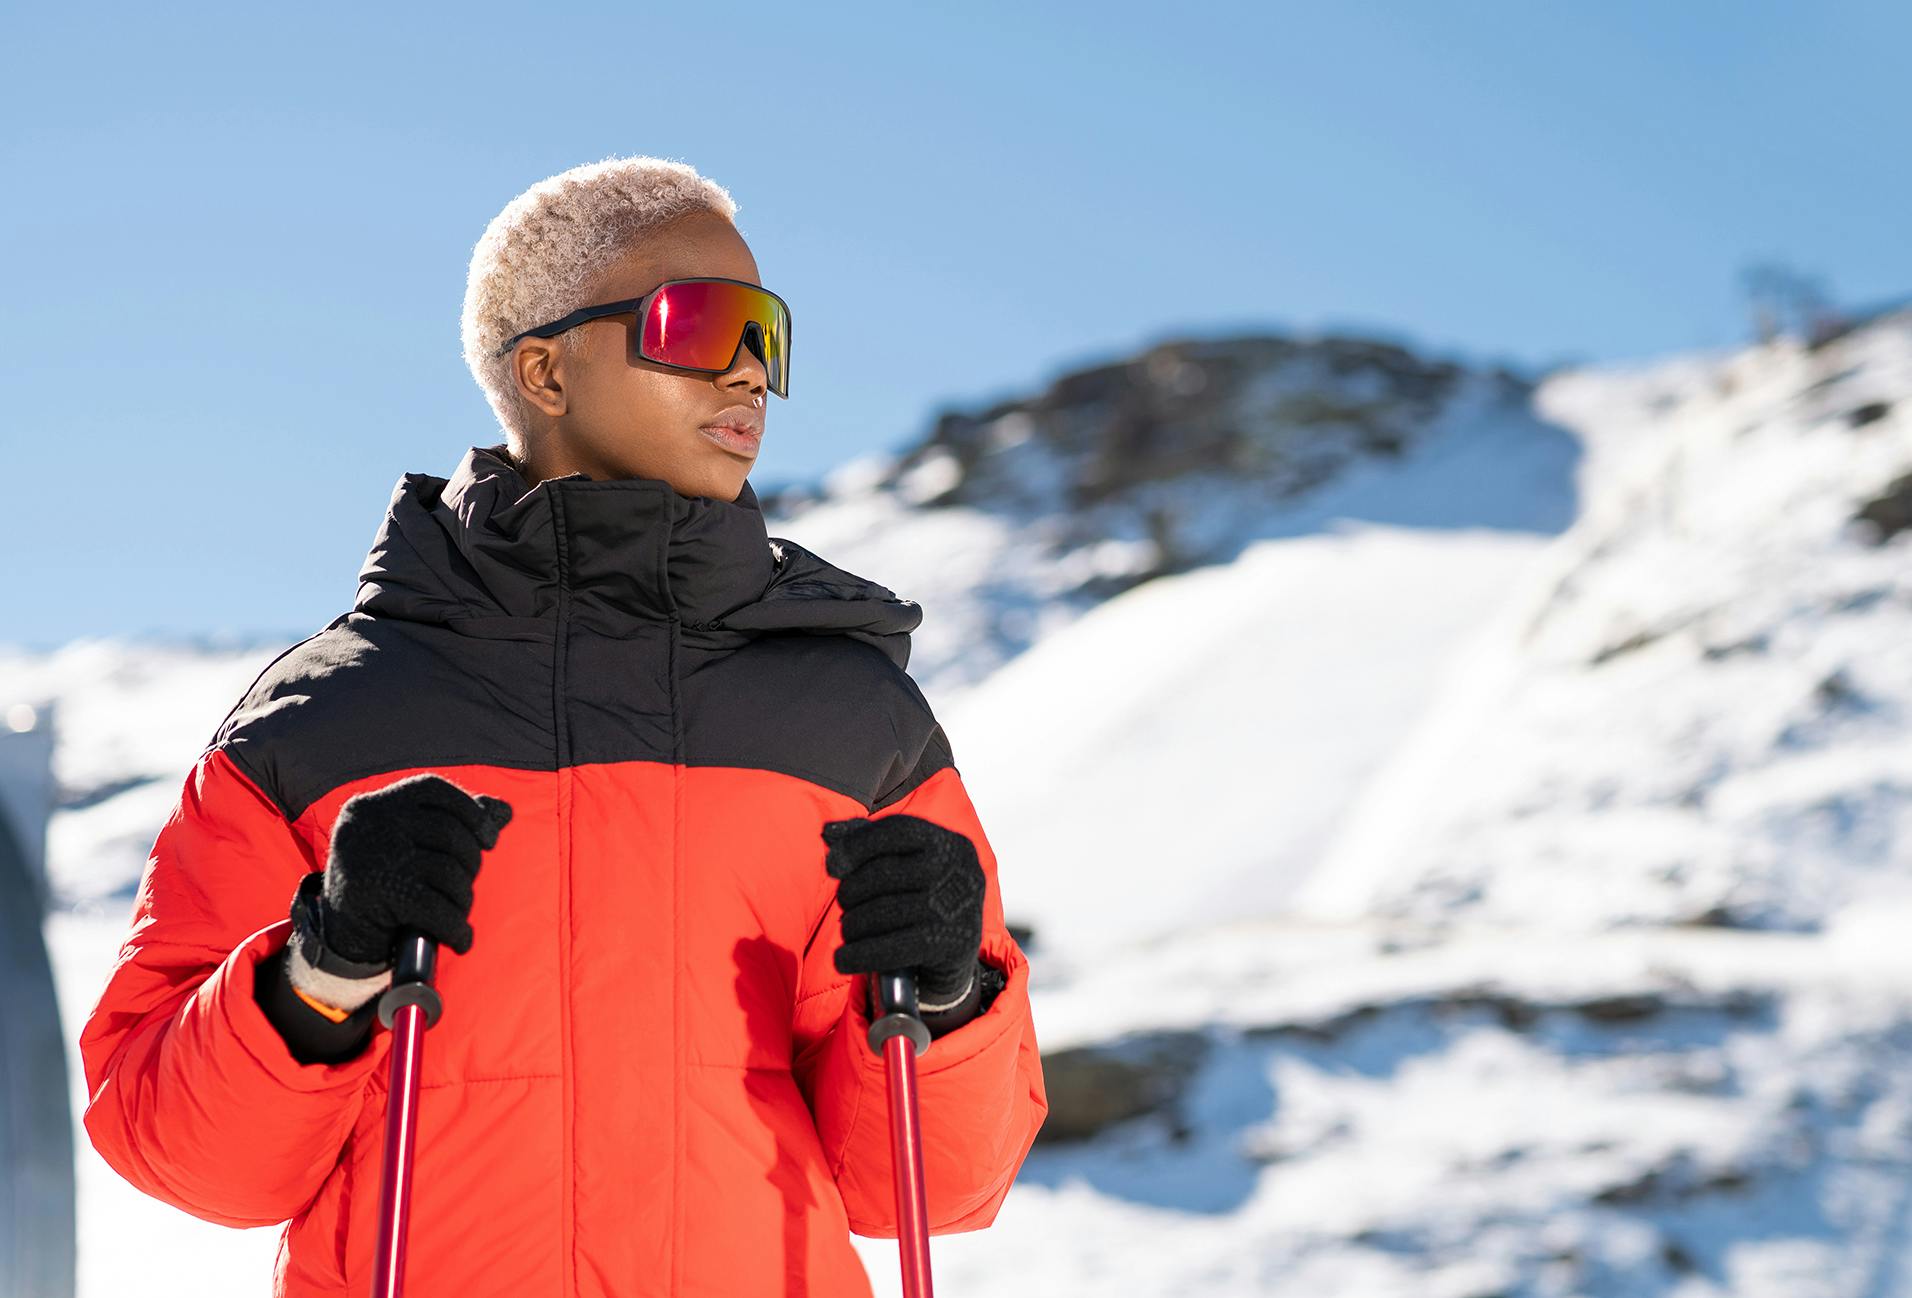 skier in red and black jacket standing on snowy slope with mountains in background